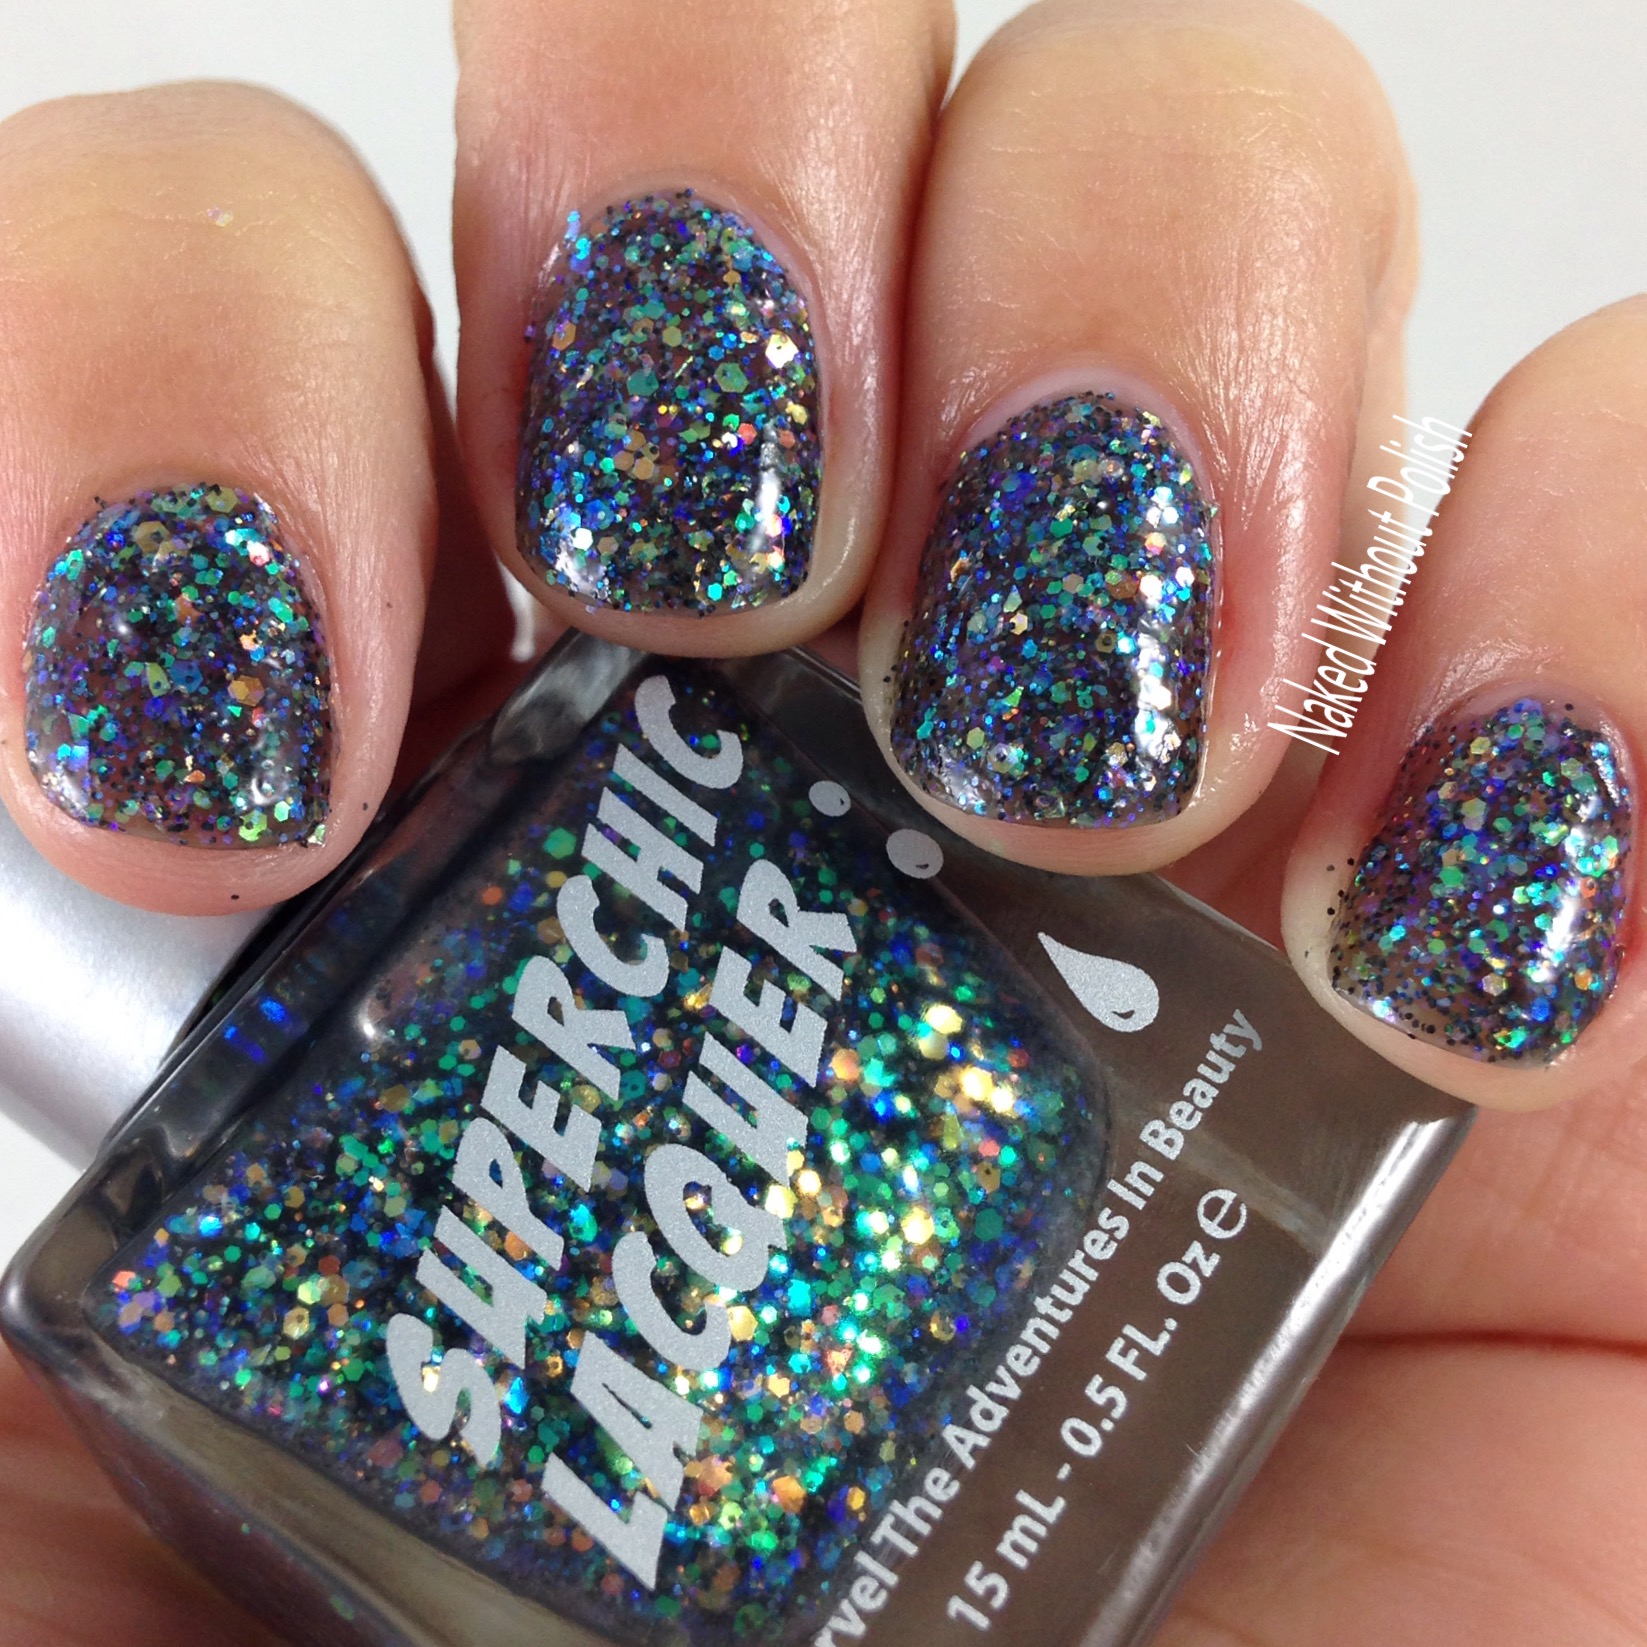 SuperChic-Lacquer-Nyxie-6